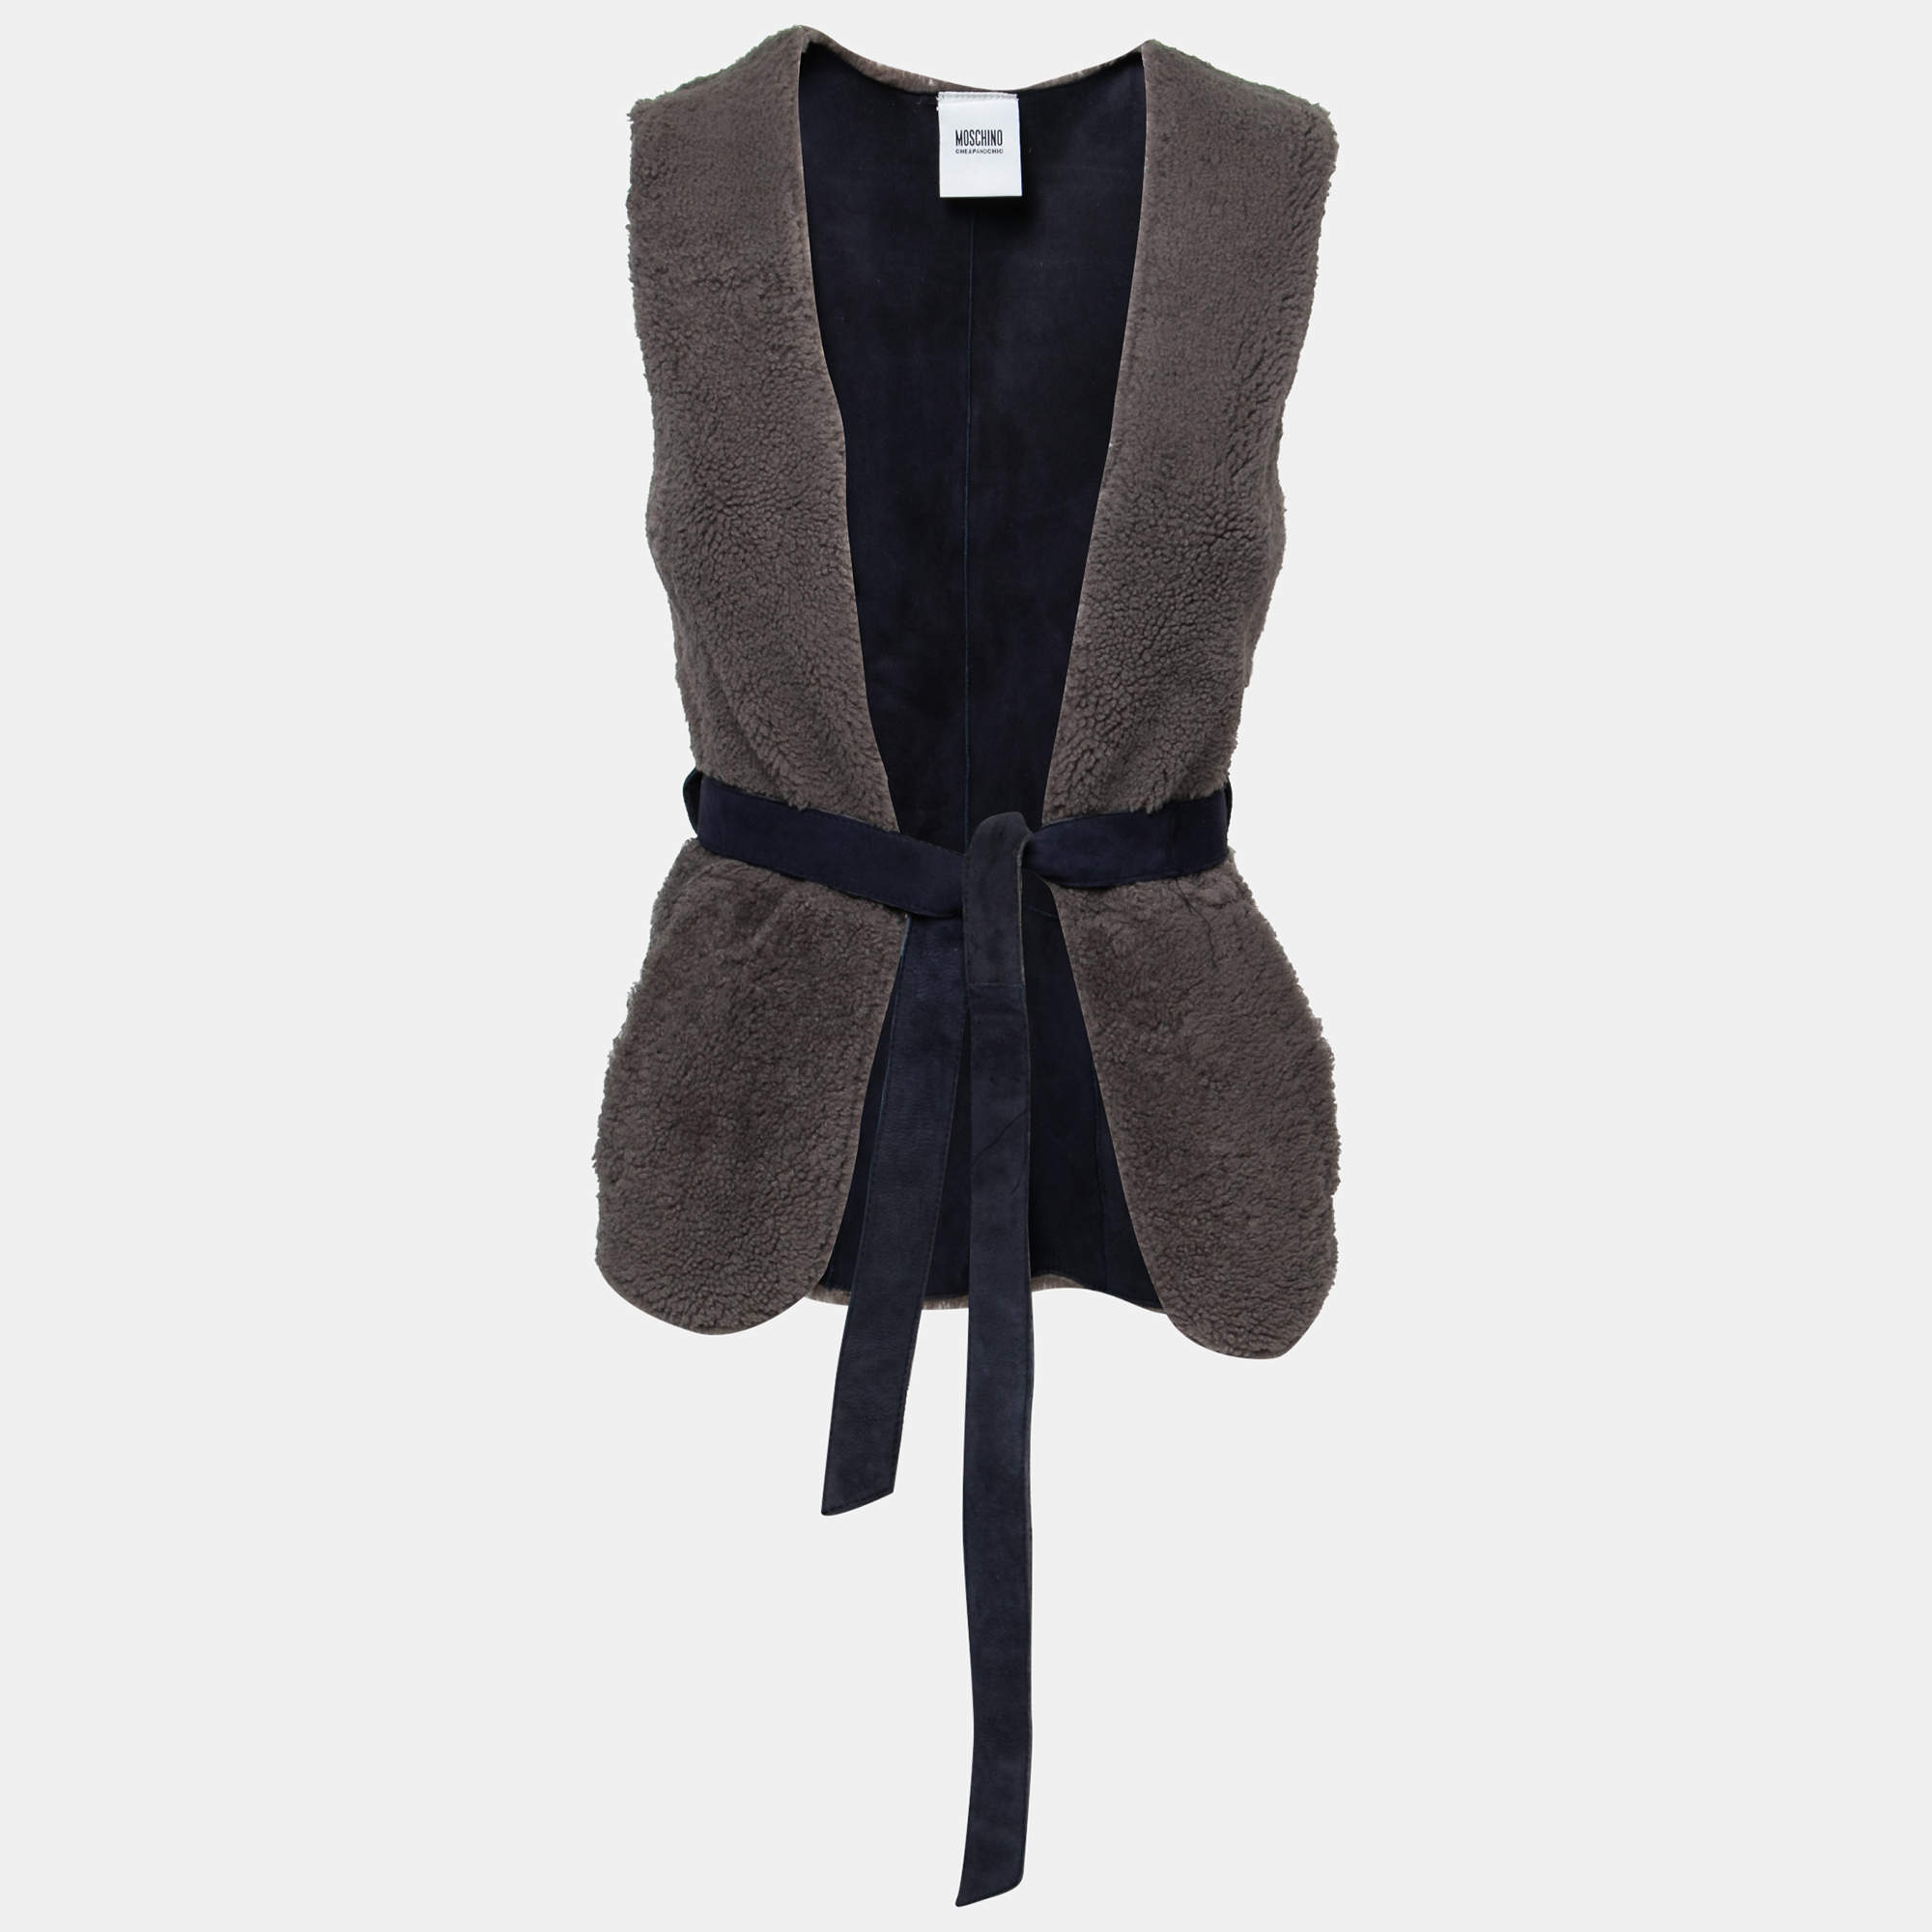 Moschino Cheap and Chic Gray Lamb Fur Leather Lined Belted Gilet S